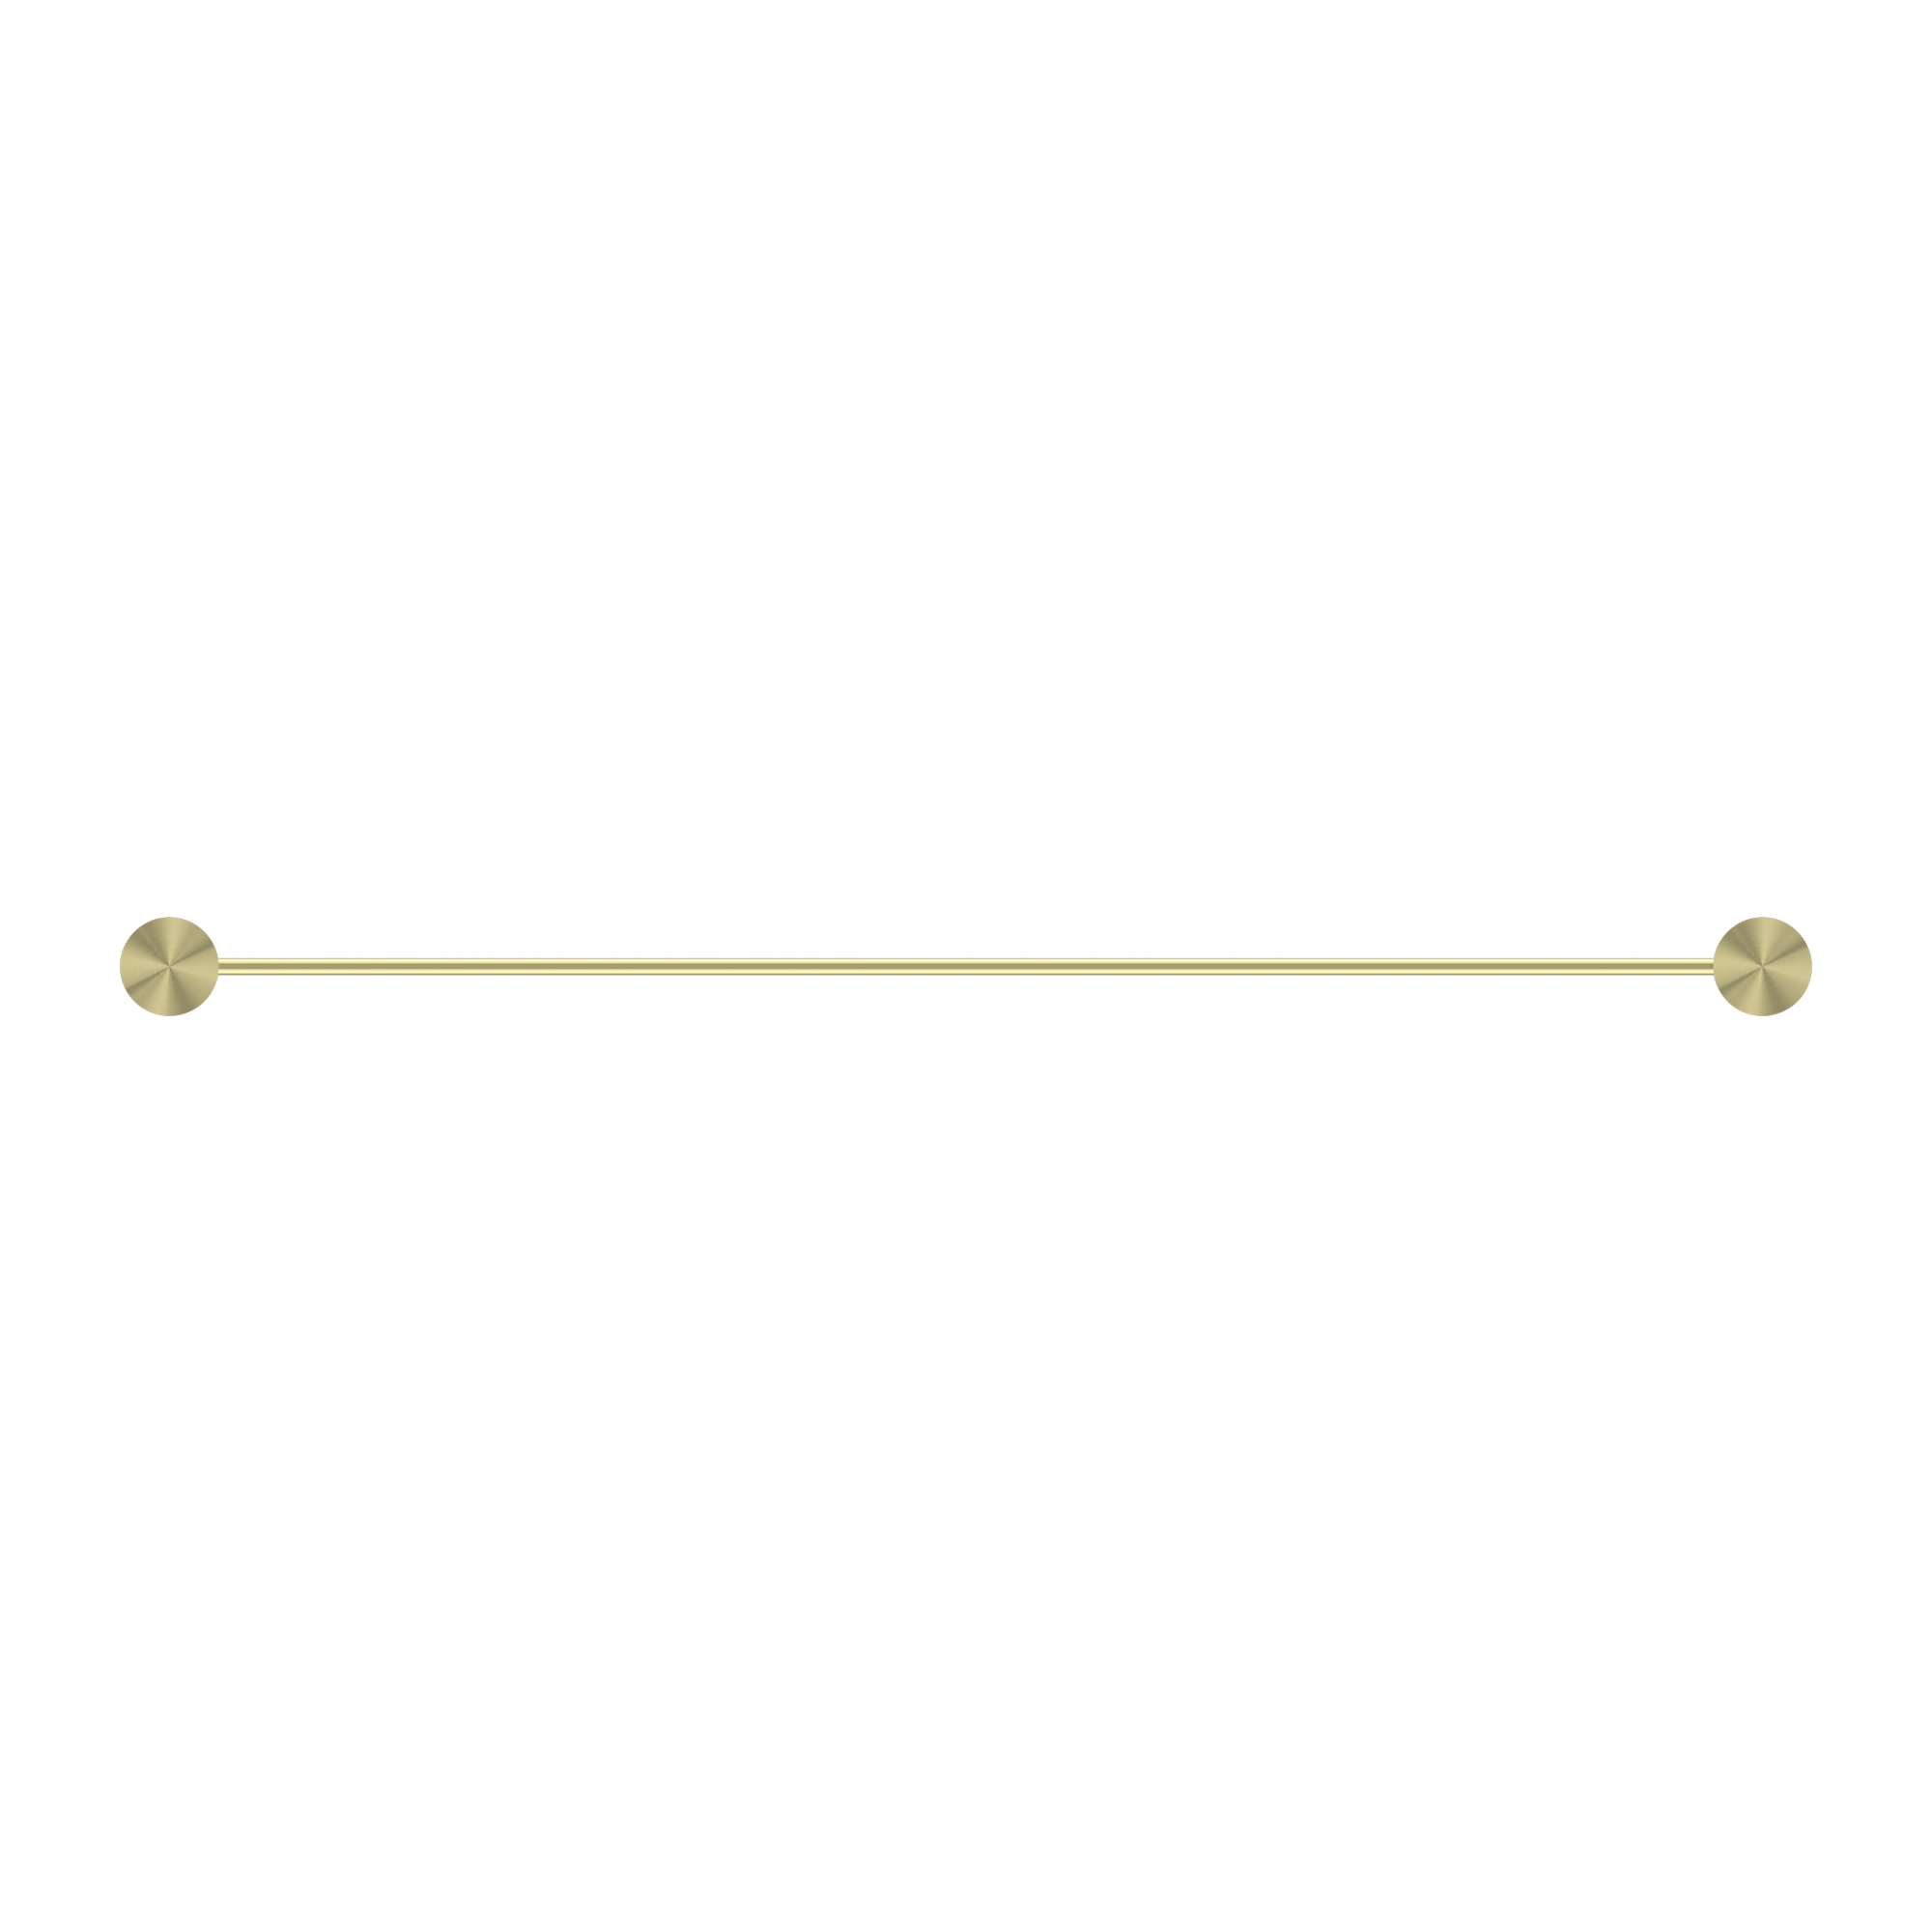 NERO OPAL NON-HEATED DOUBLE TOWEL RAIL BRUSHED GOLD (AVAILABLE IN 600MM AND 800MM)